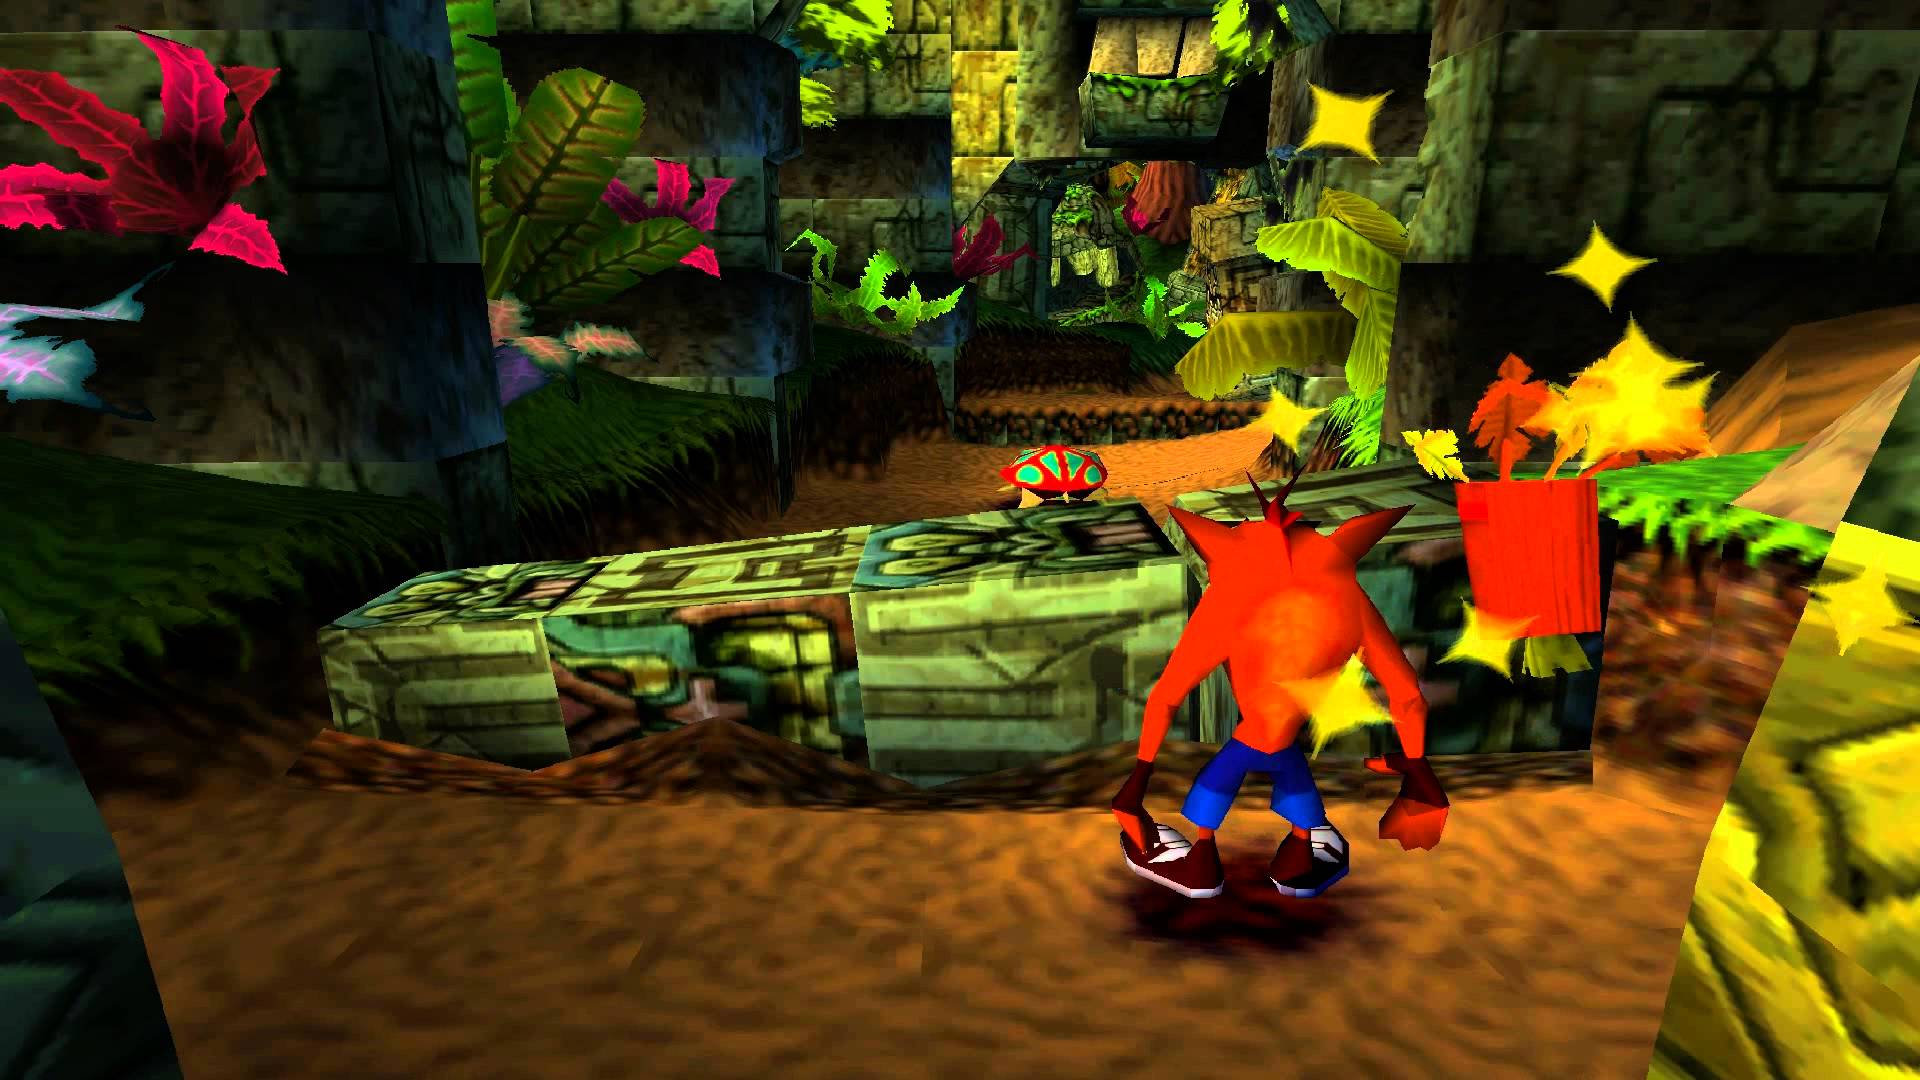 Crash Bandicoot revival confirmed by NECA Toys, afterwards denied